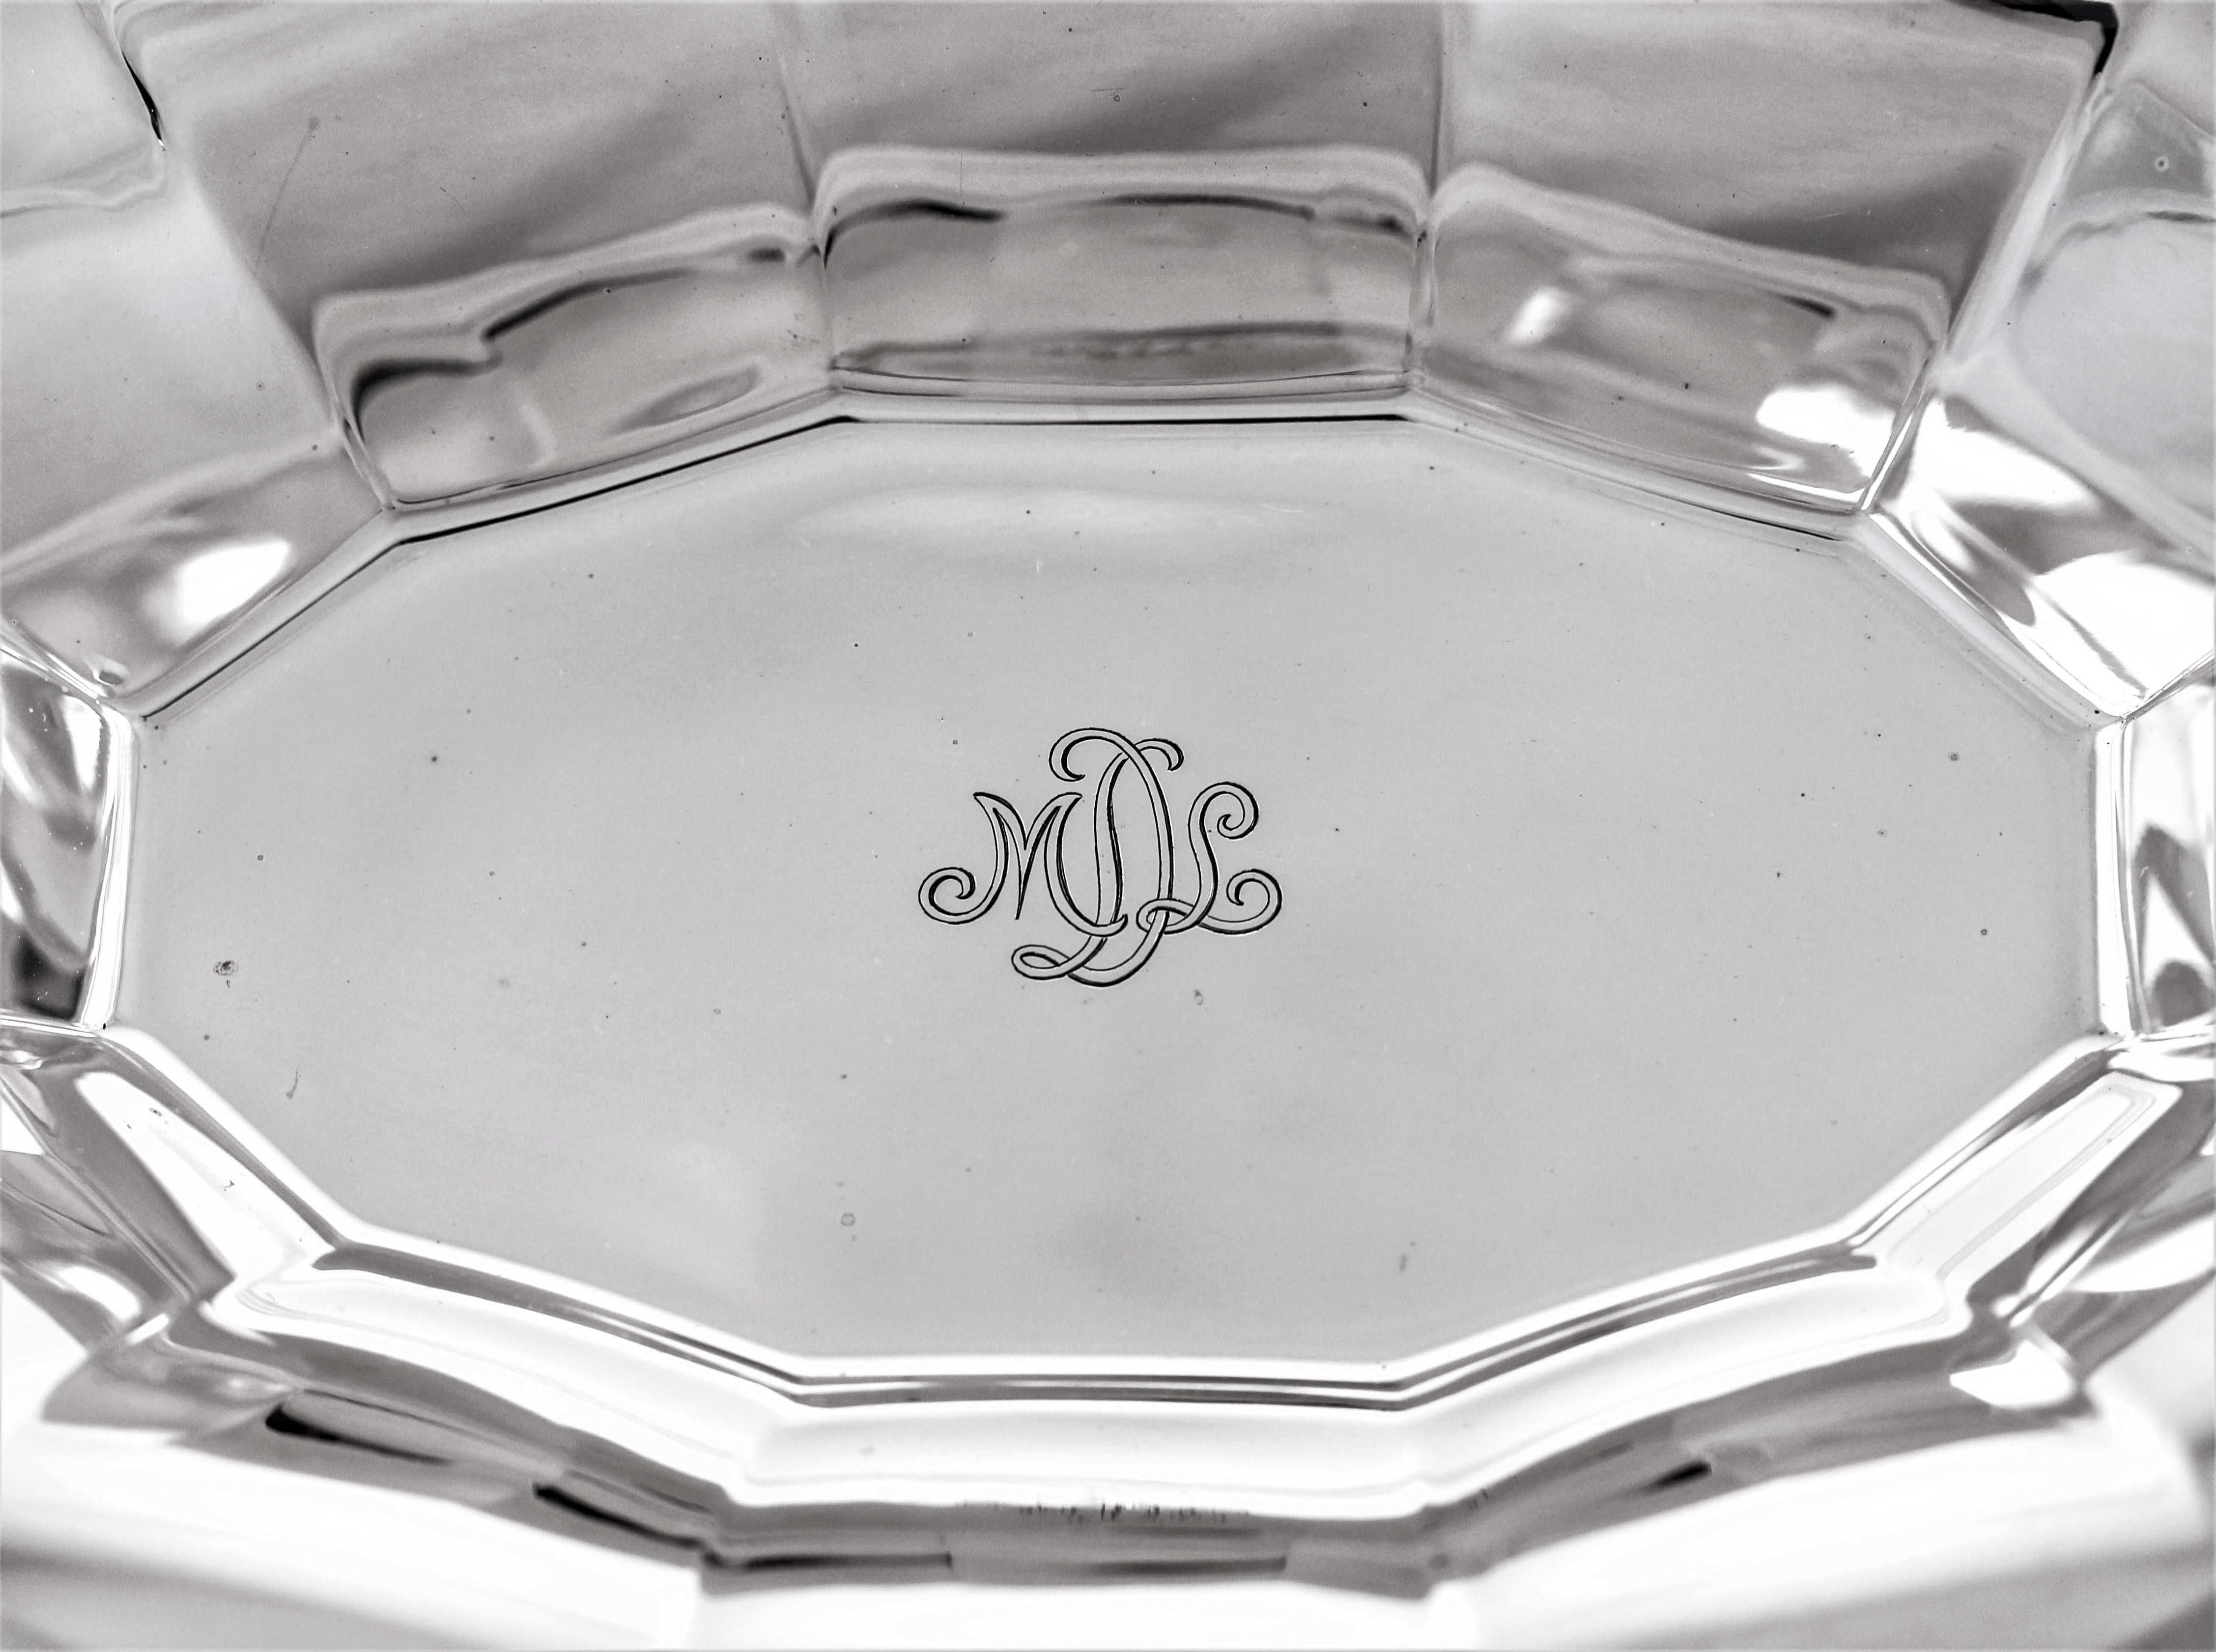 A large scalloped rim encircles the entire circumference. Along the inside, ridges at each point where the scalloping dips. In the centre a hand engraved monogram of the letters MDL in script. This piece has a modern youthful look and can be used